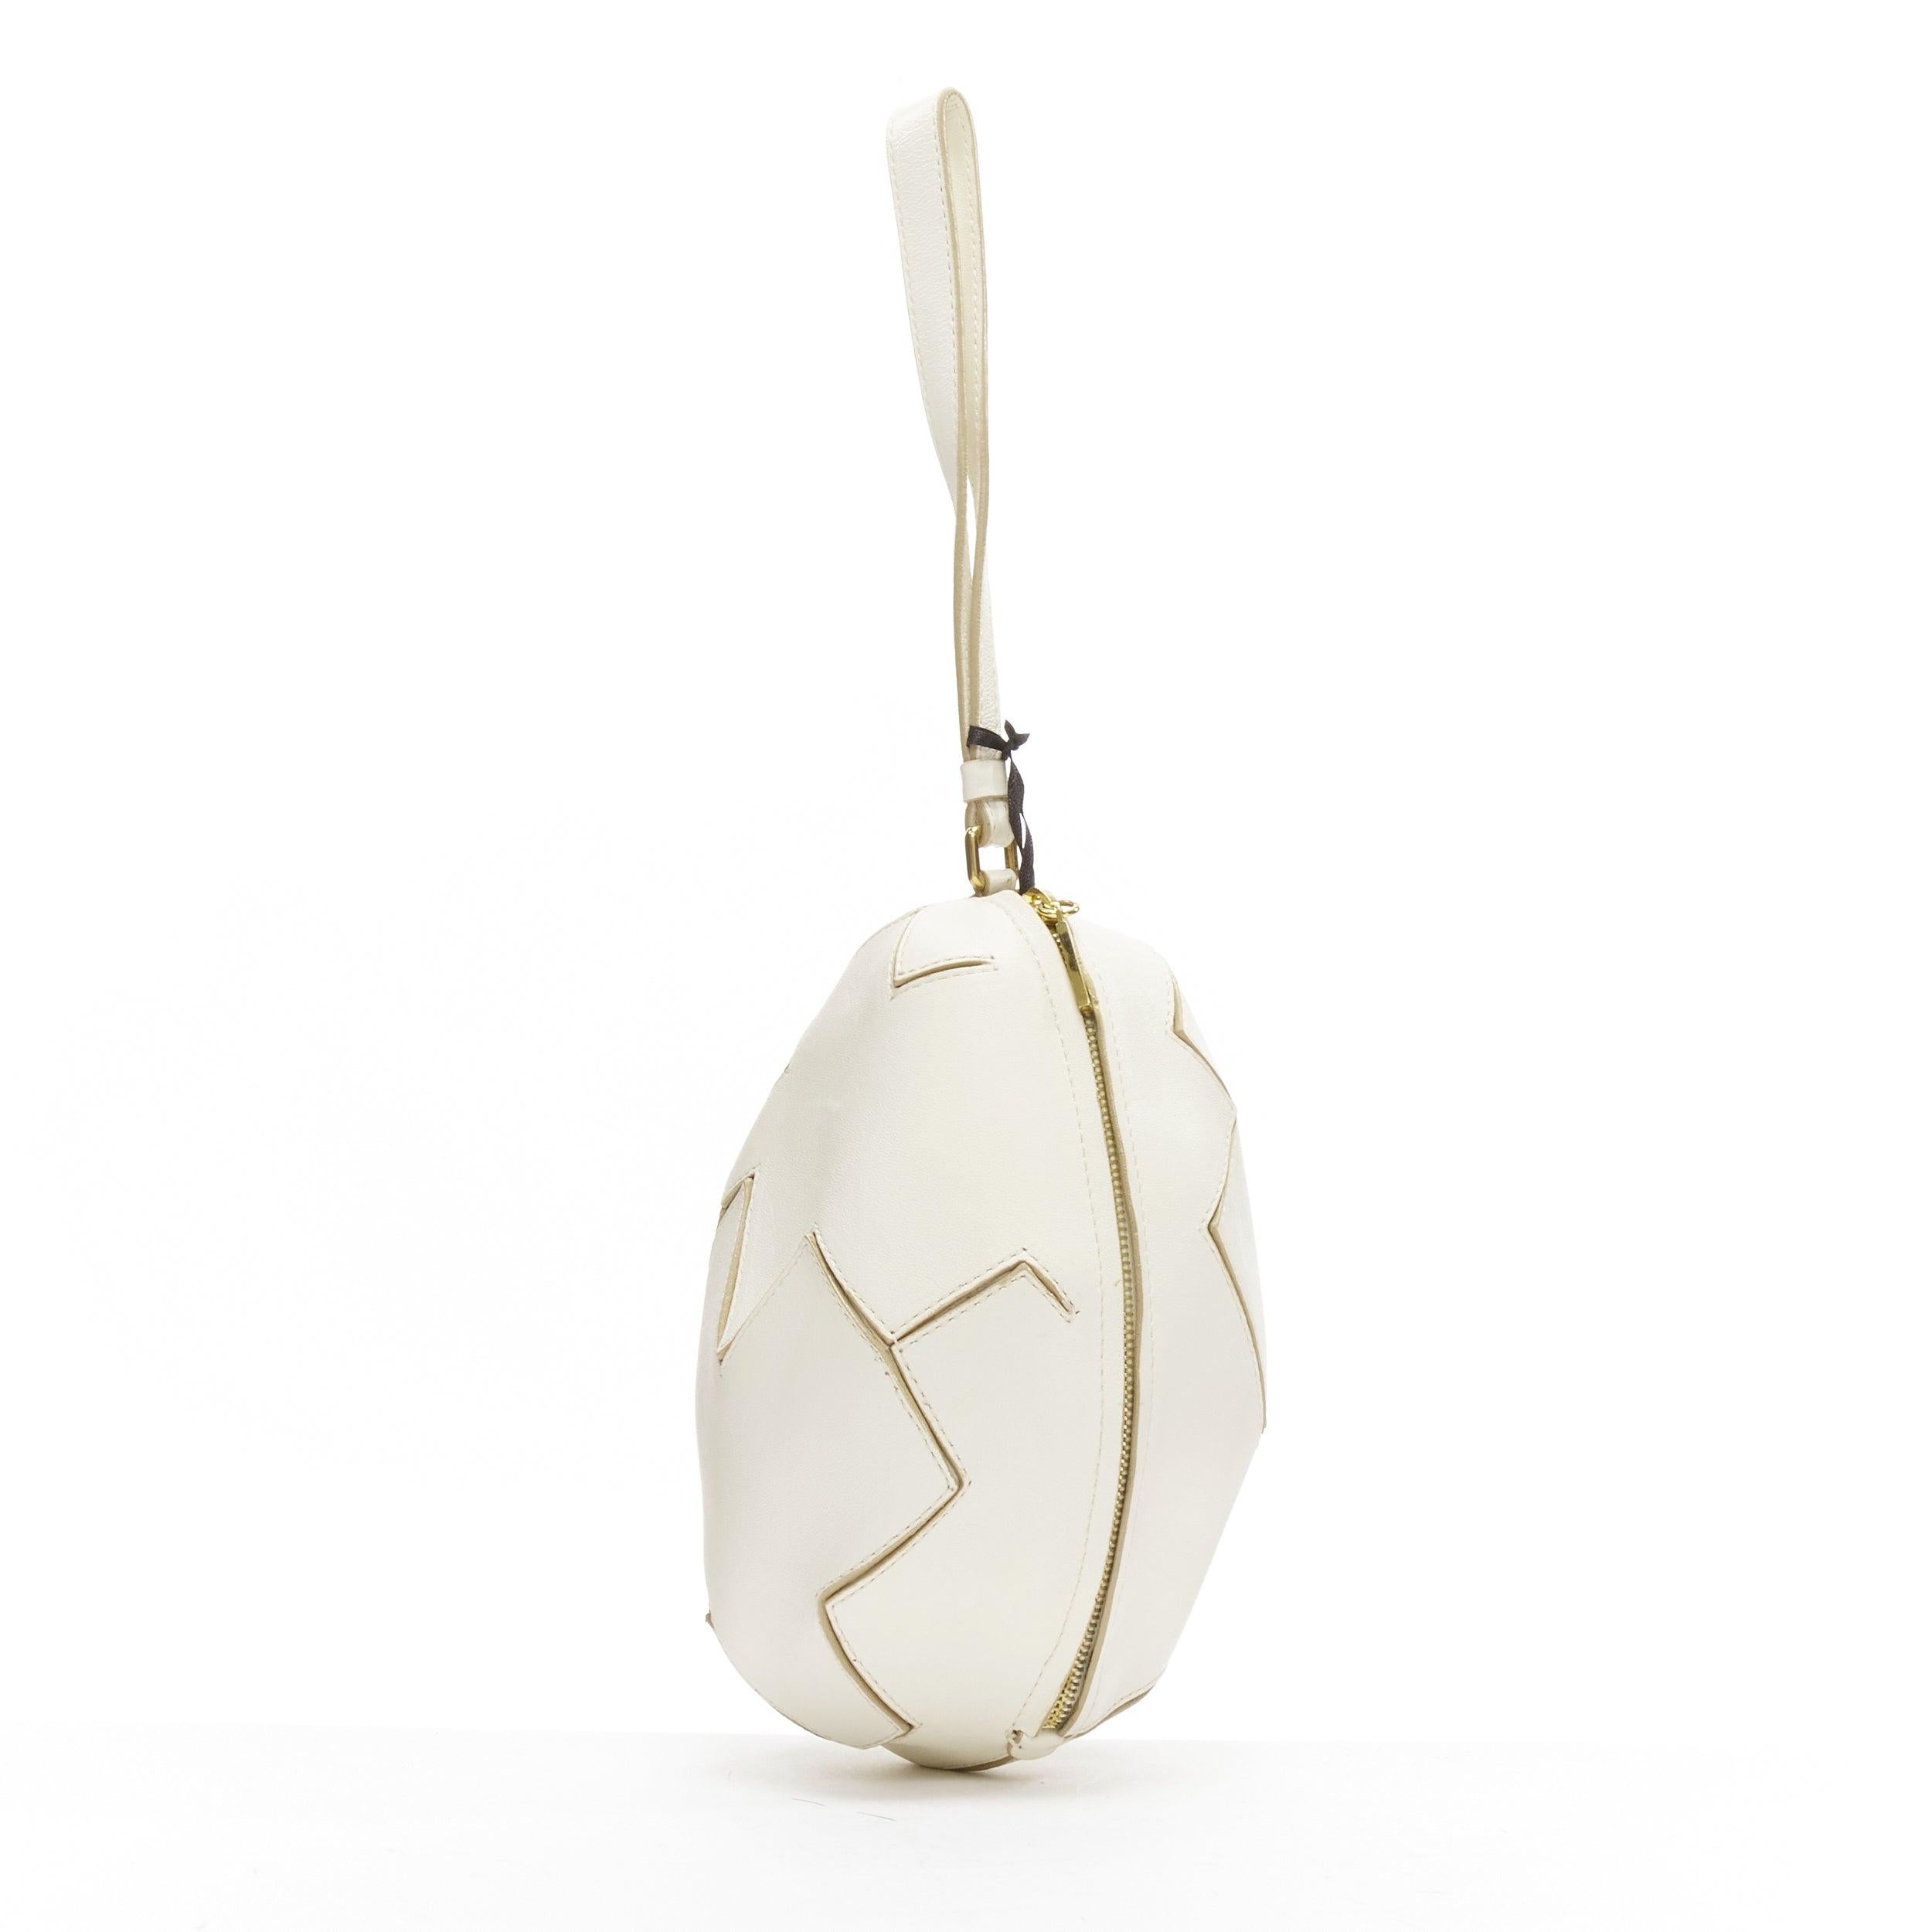 new MOSCHINO CHEAP AND CHIC Flintstone ivory white leather cracked egg wristlet clutch
Reference: TGAS/D00498
Brand: Moschino
Designer: Jeremy Scott
Collection: CHEAP AND CHIC
Material: Leather
Color: White
Pattern: Solid
Closure: Zip
Lining: Gold